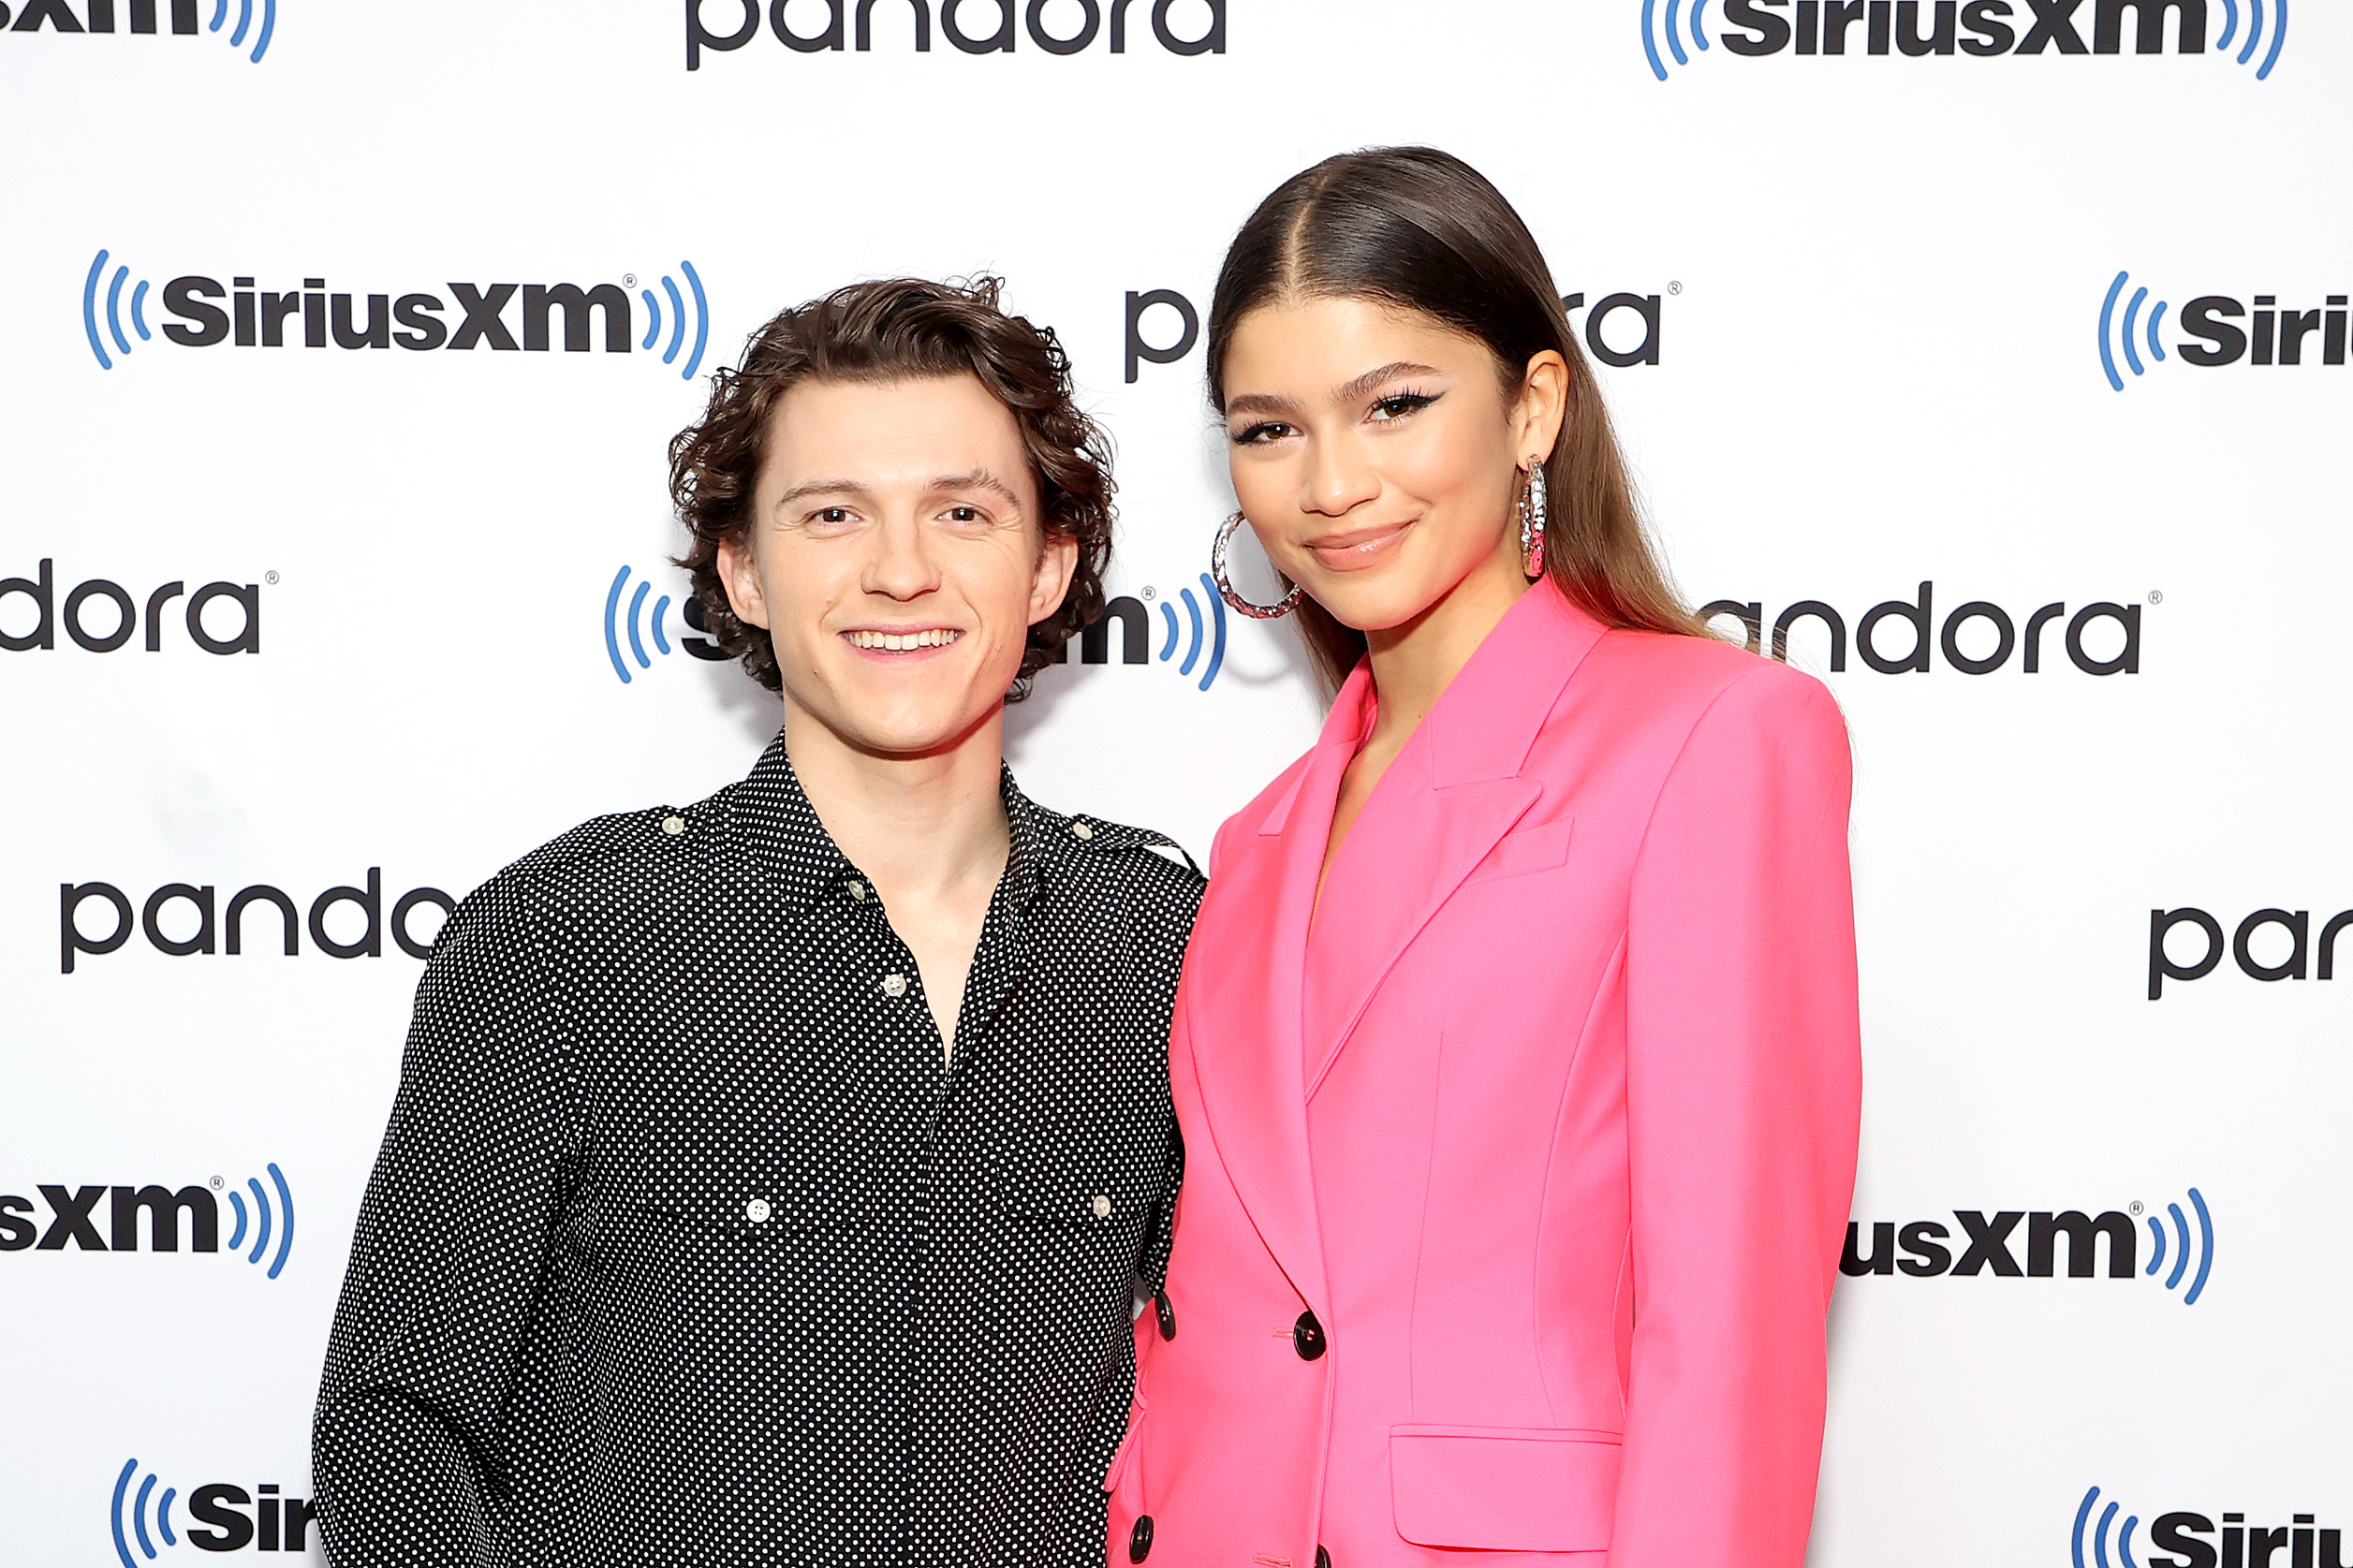 Tom Holland Reacts To Zendaya’s NAACP Image Awards Outfit